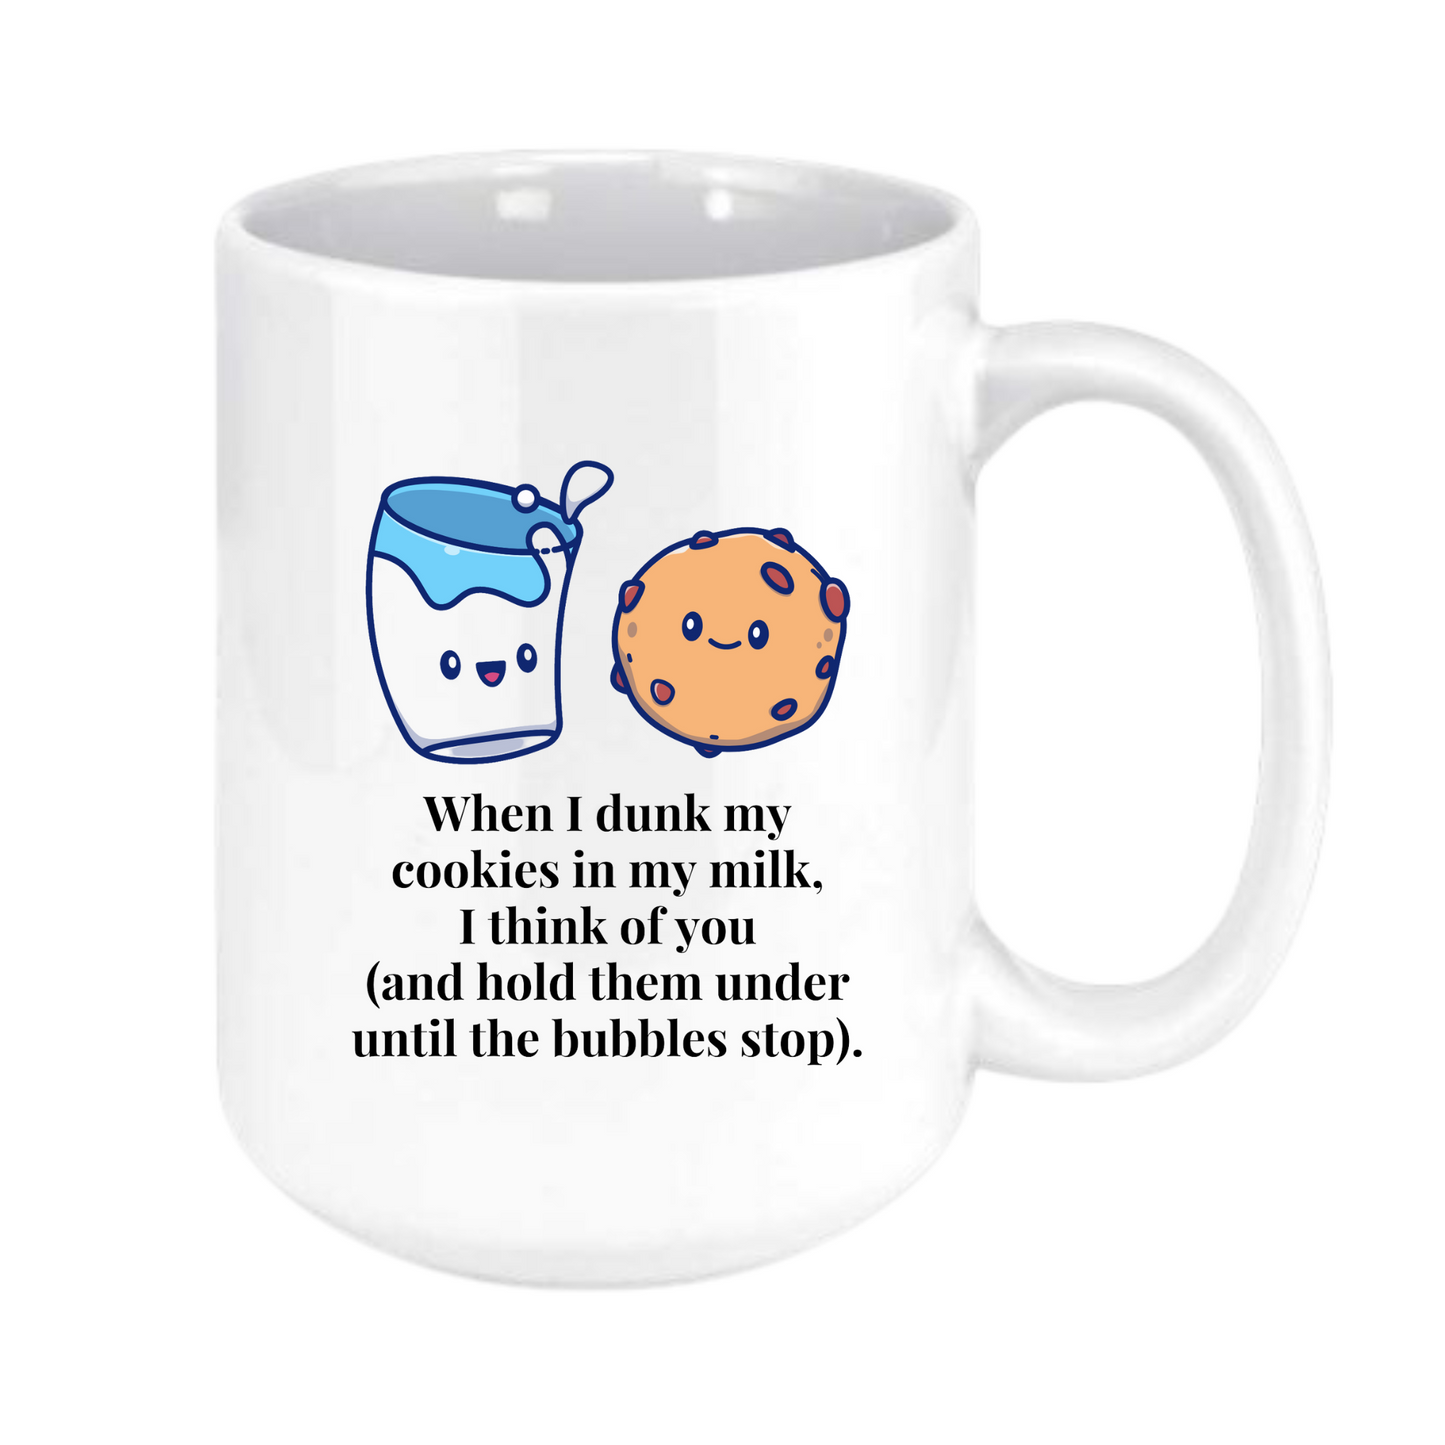 When I dunk my cookies in my milk, I think of you... mug